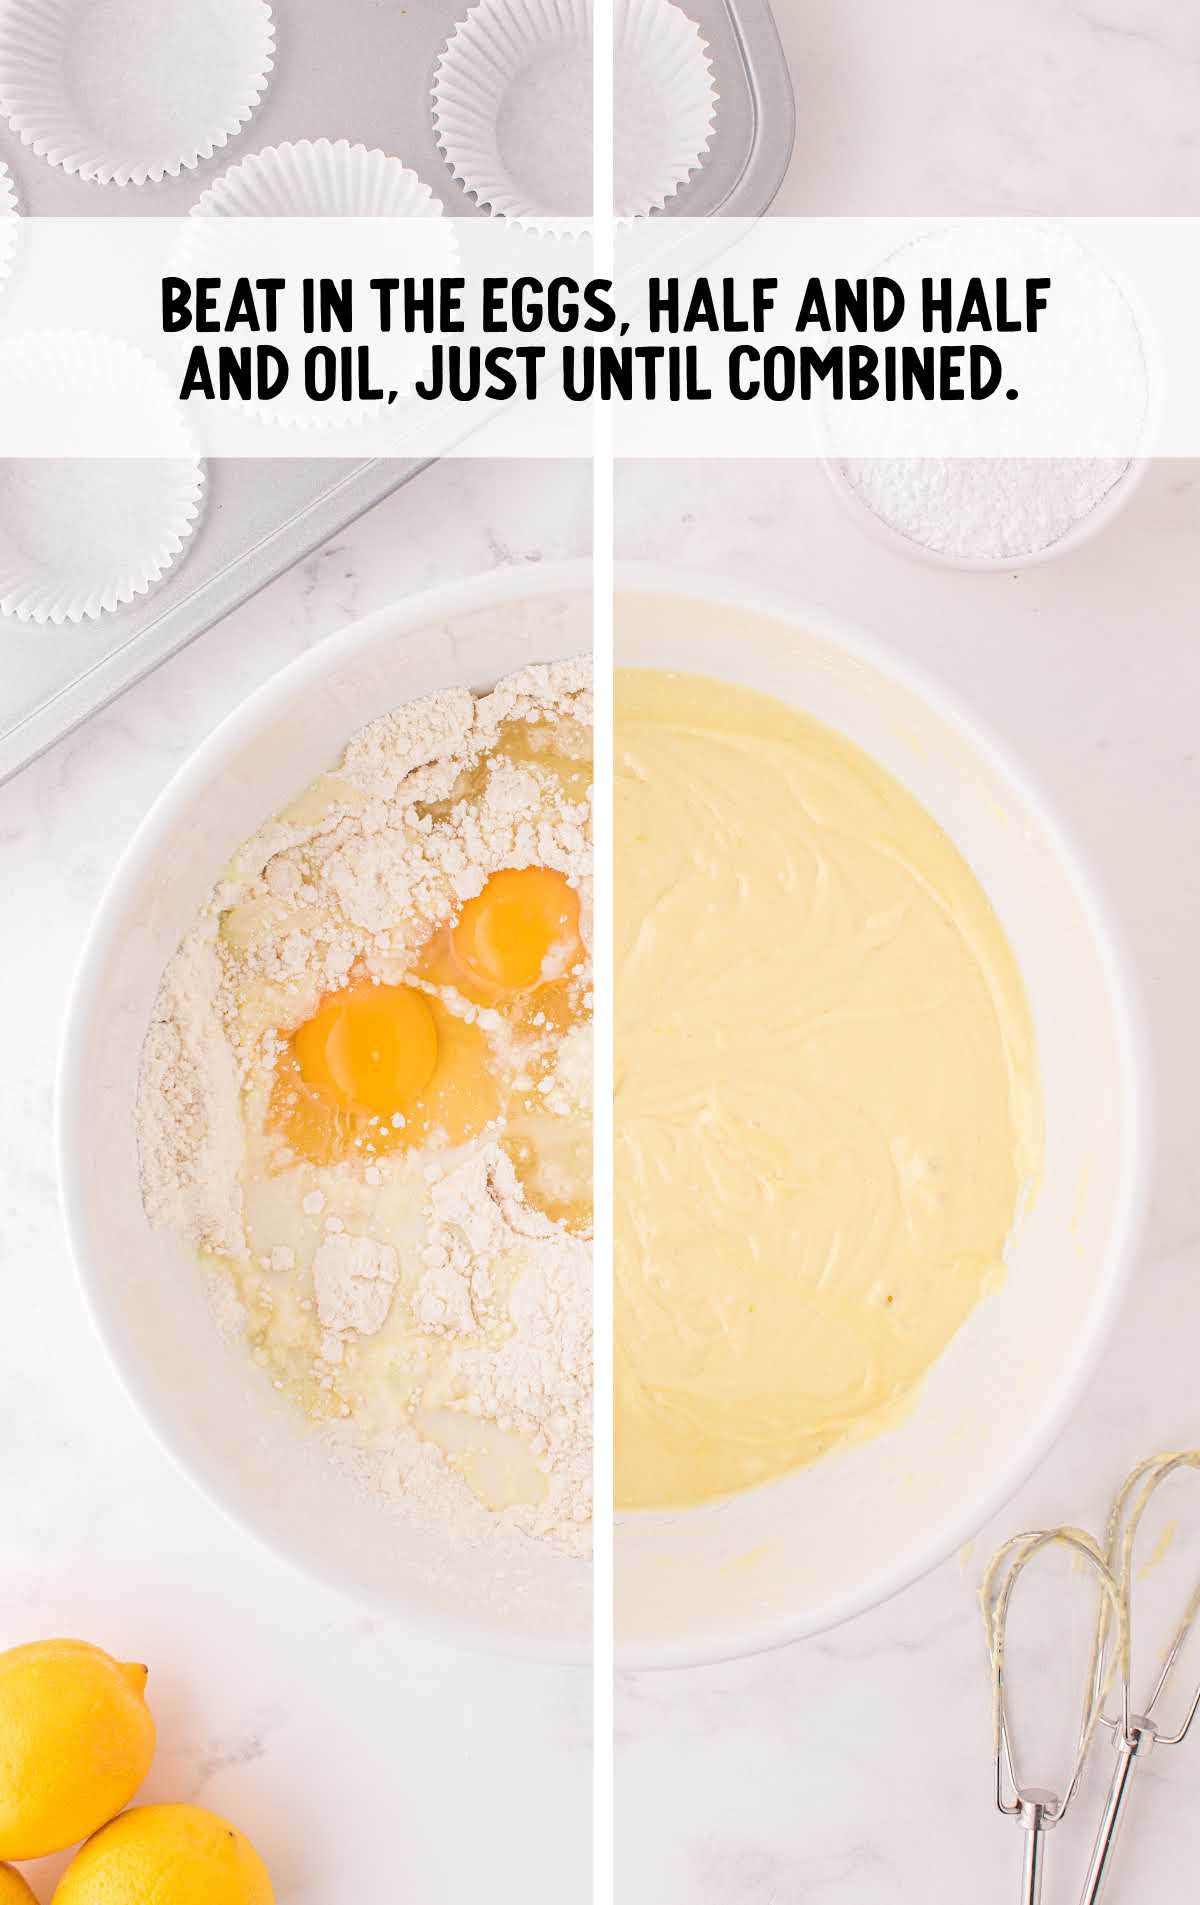 eggs, half and half, and oil blended together